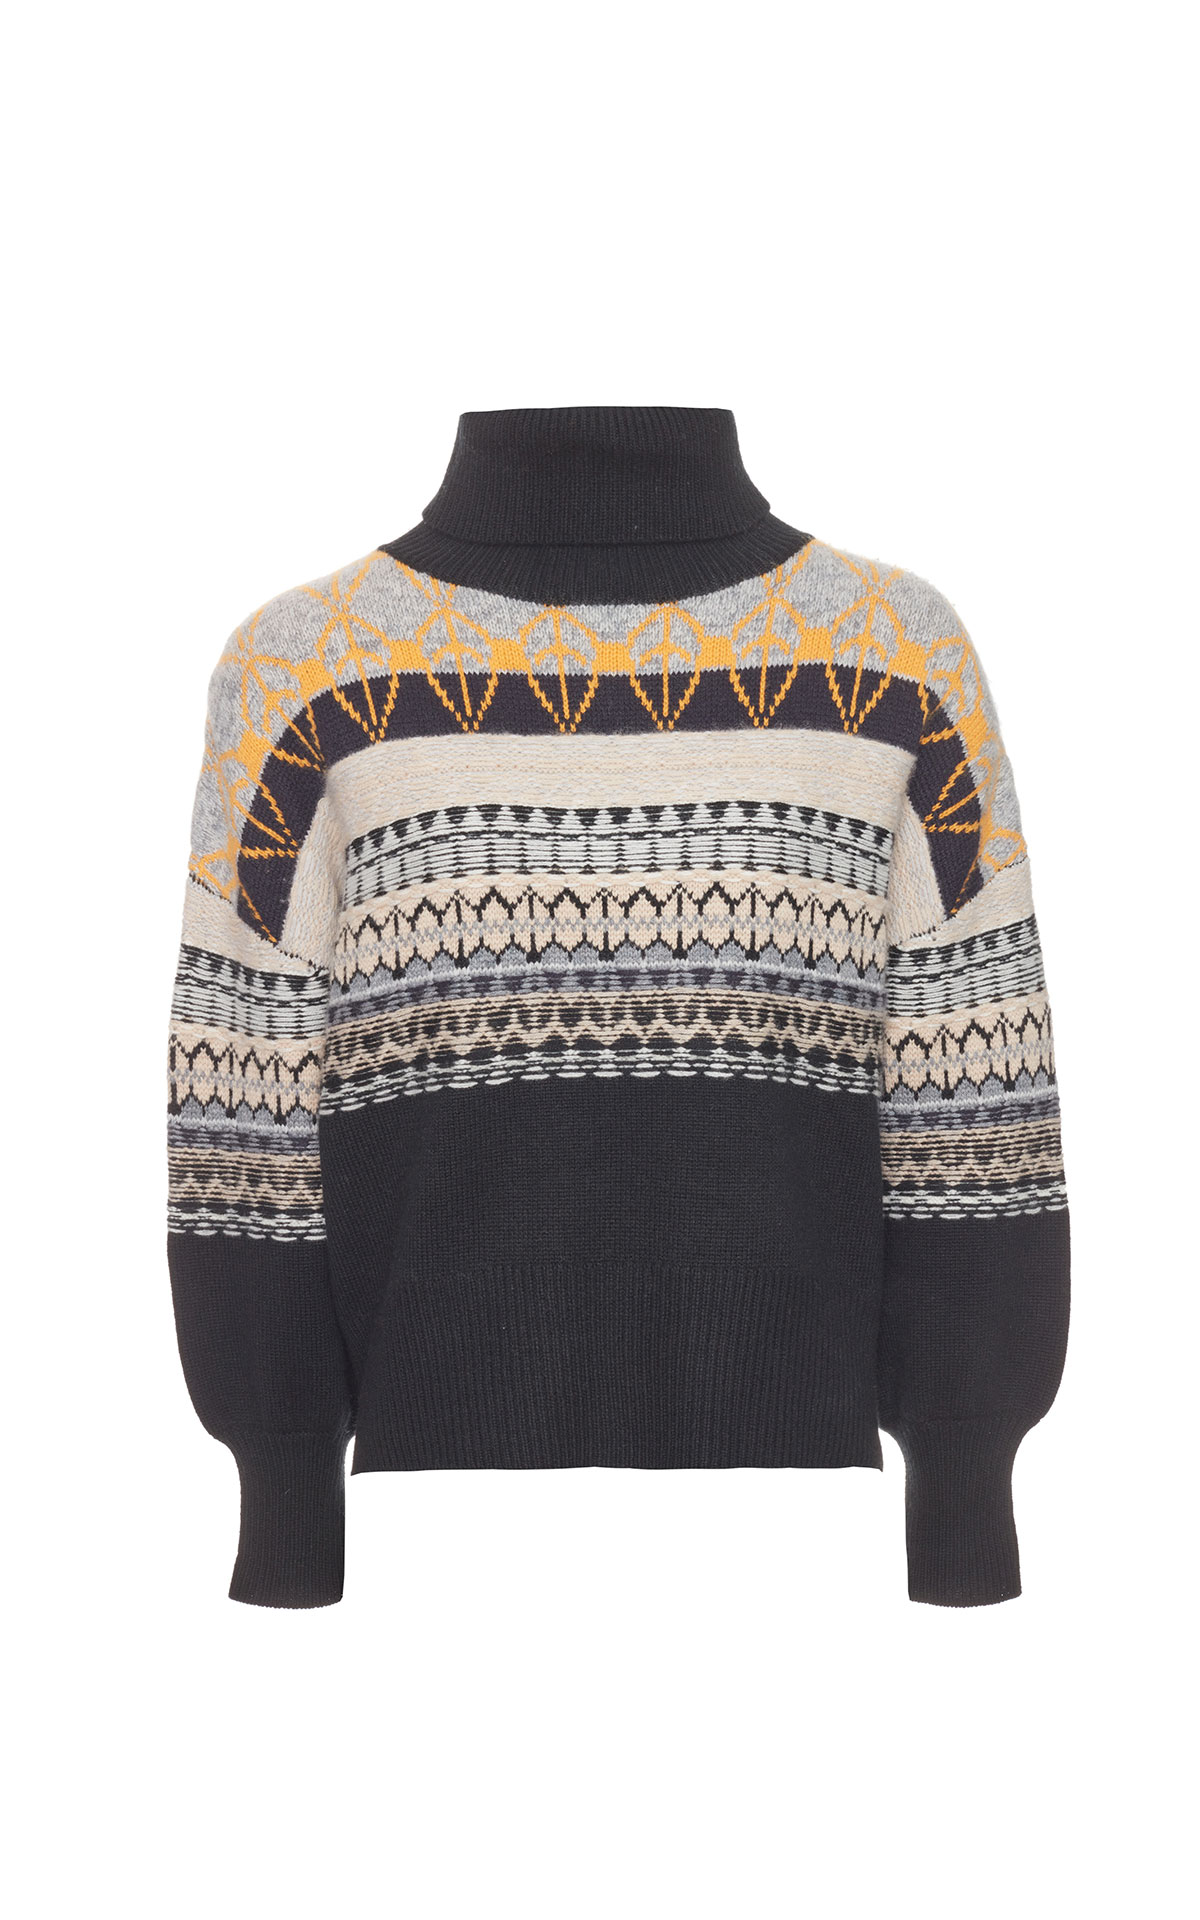 N.Peal Loop intarsia chunky cashmere sweater from Bicester Village